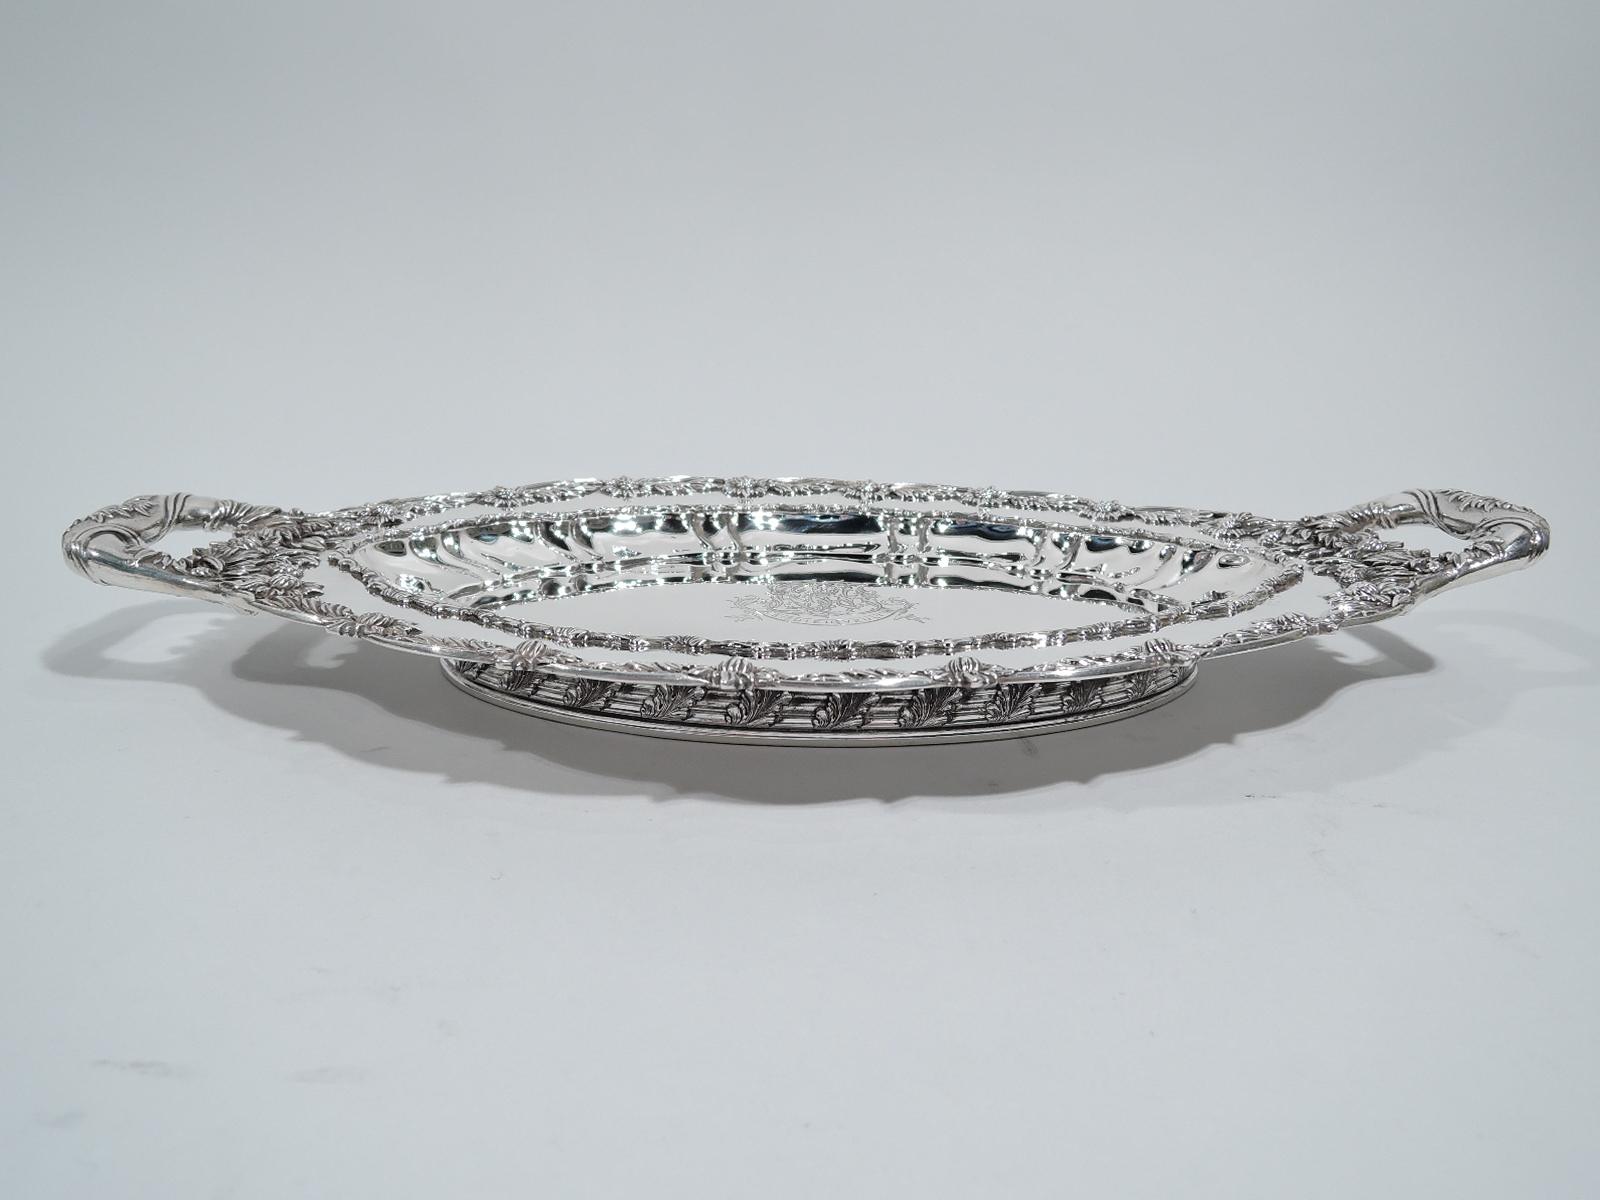 Chrysanthemum sterling silver serving dish. Made by Tiffany & Co. in New York. Ovalish well, curved sides with lobing and applied leaf border, and scalloped rim with the famous chrysanthemum flower heads alternating with leaves. A profusion of